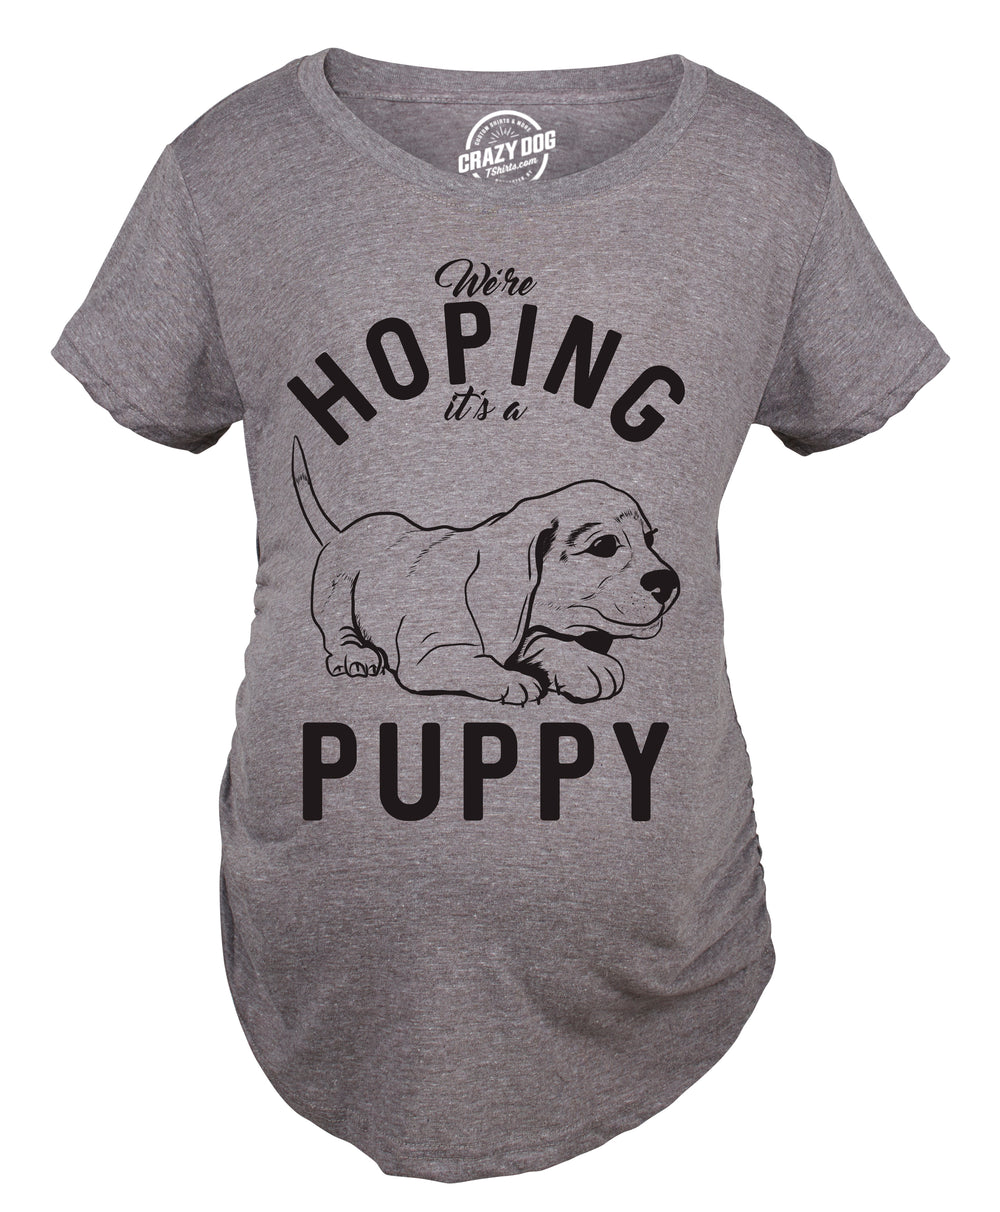 Funny Dark Heather Grey Hoping It's A Puppy Maternity T Shirt Nerdy Dog Sarcastic Tee